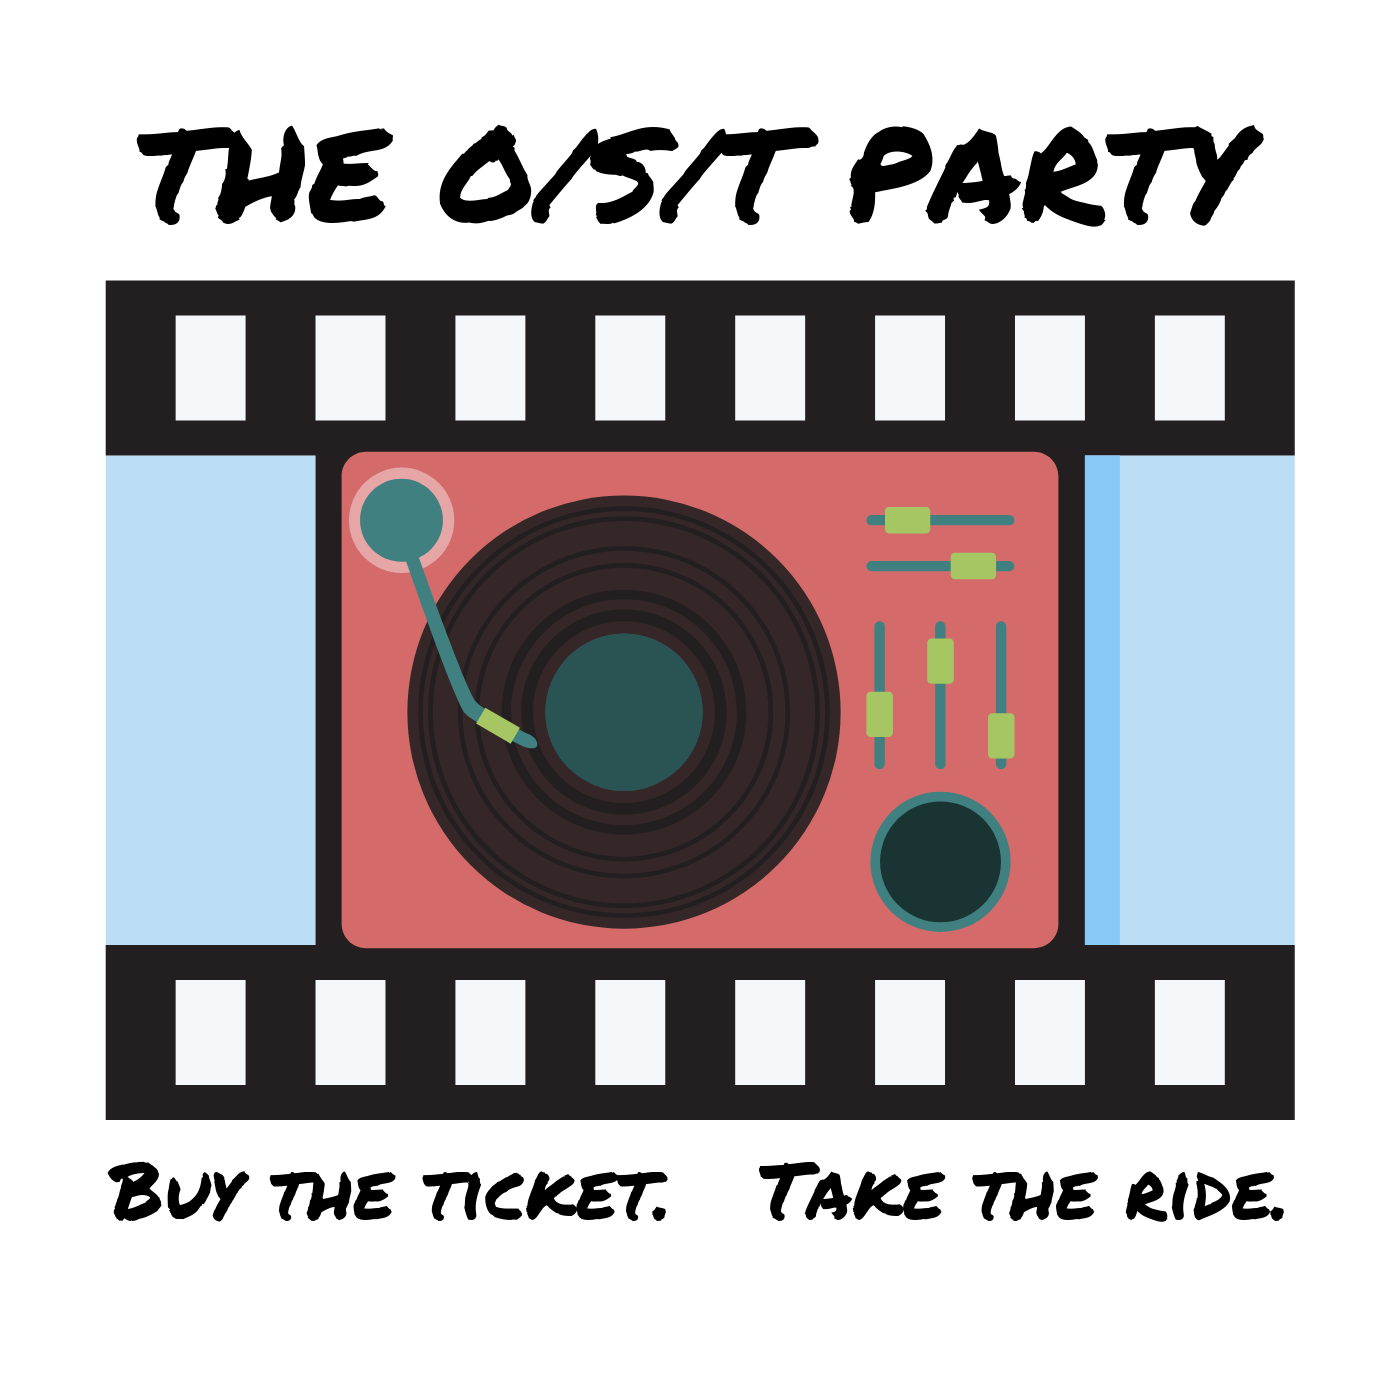 The OST Party